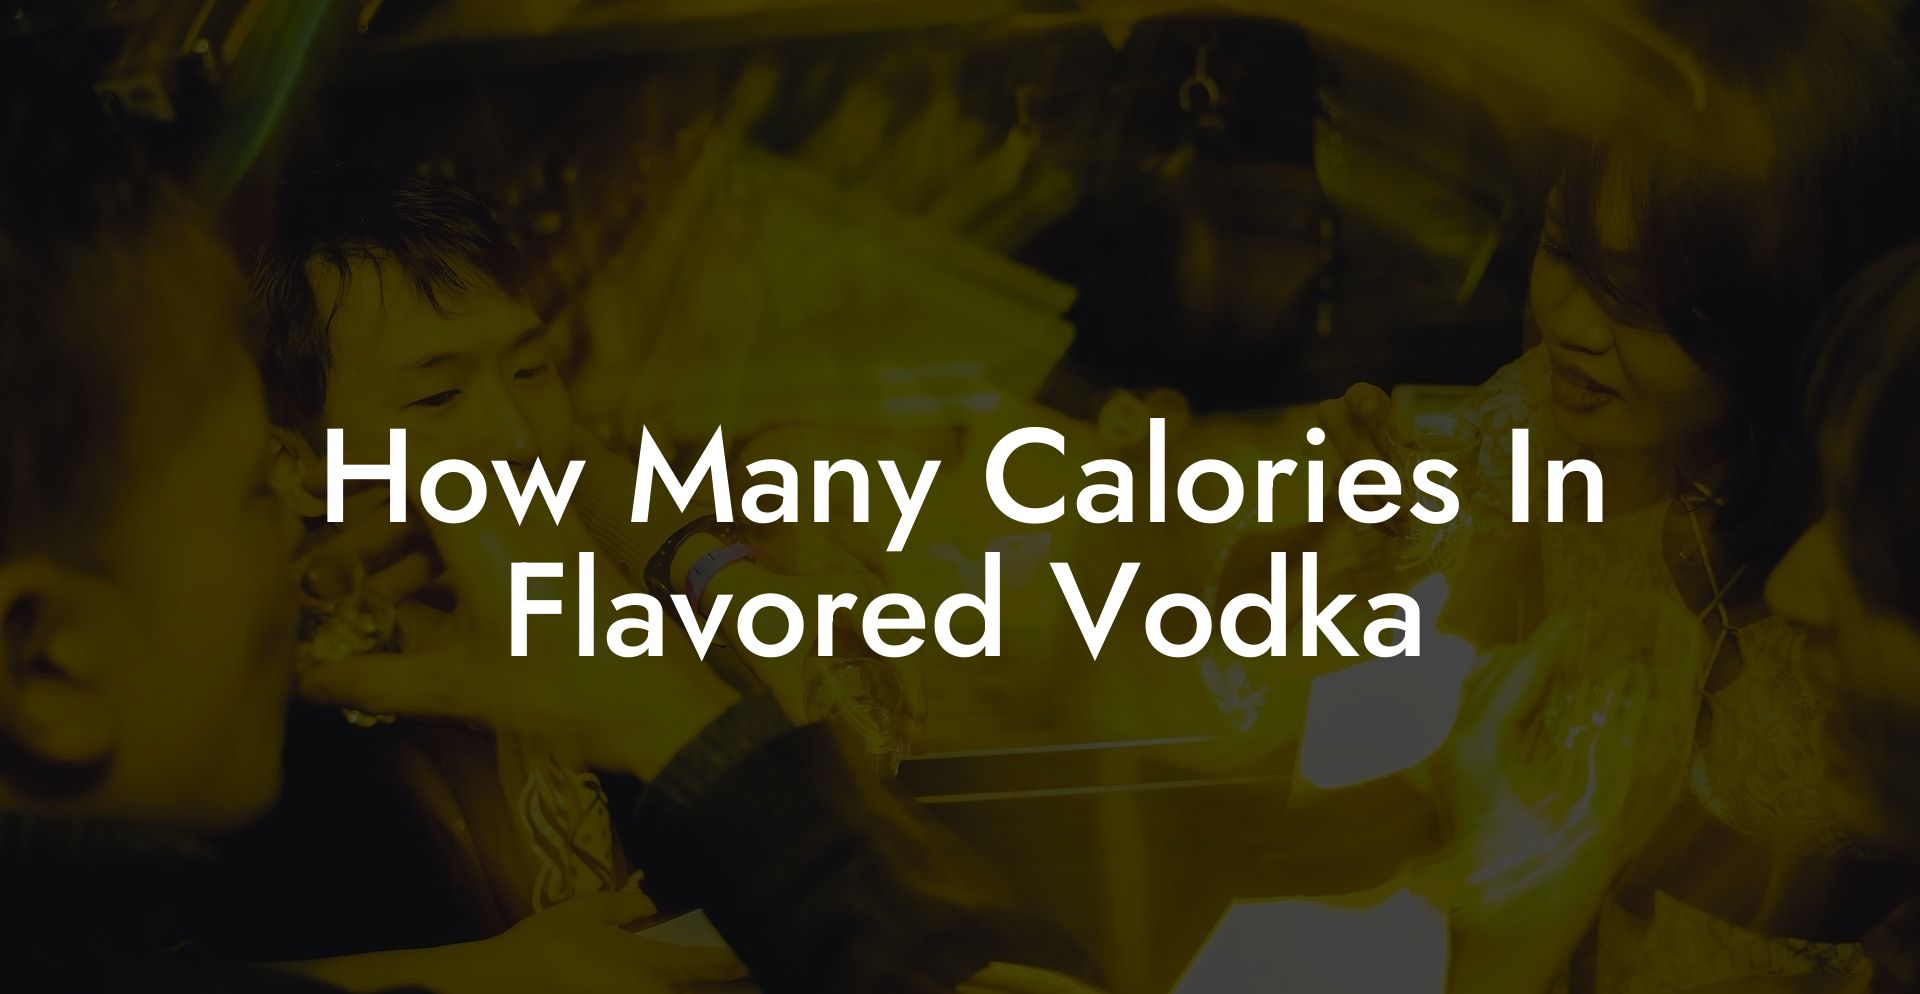 How Many Calories In Flavored Vodka